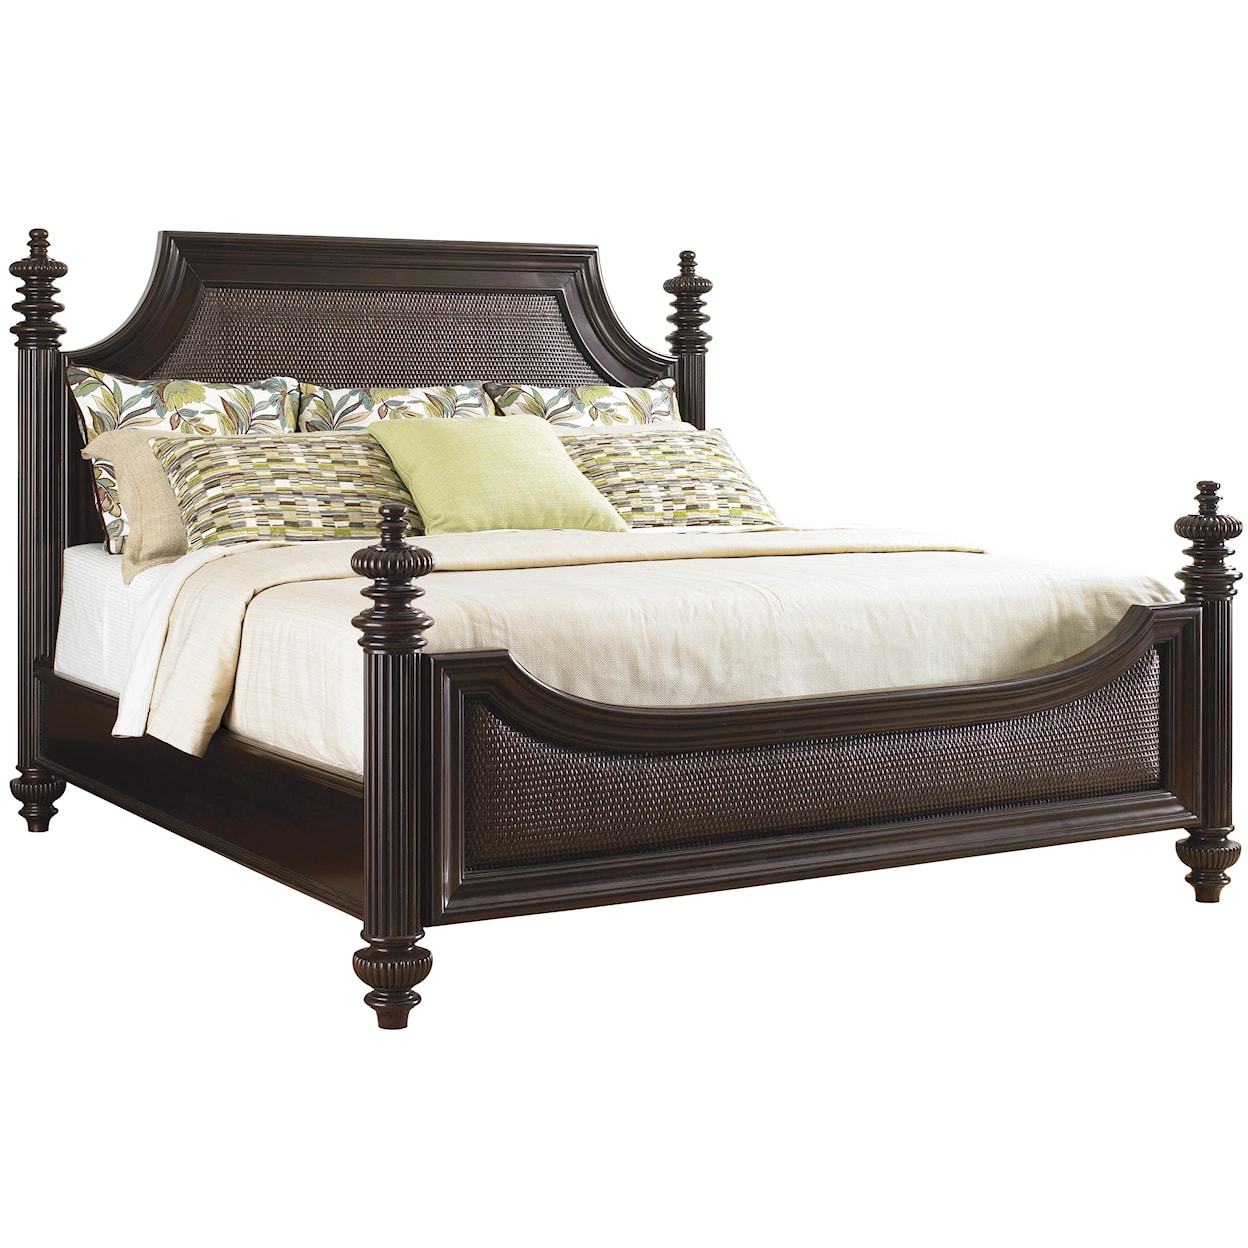 Tommy Bahama Home Royal Kahala King Harbour Point Bed